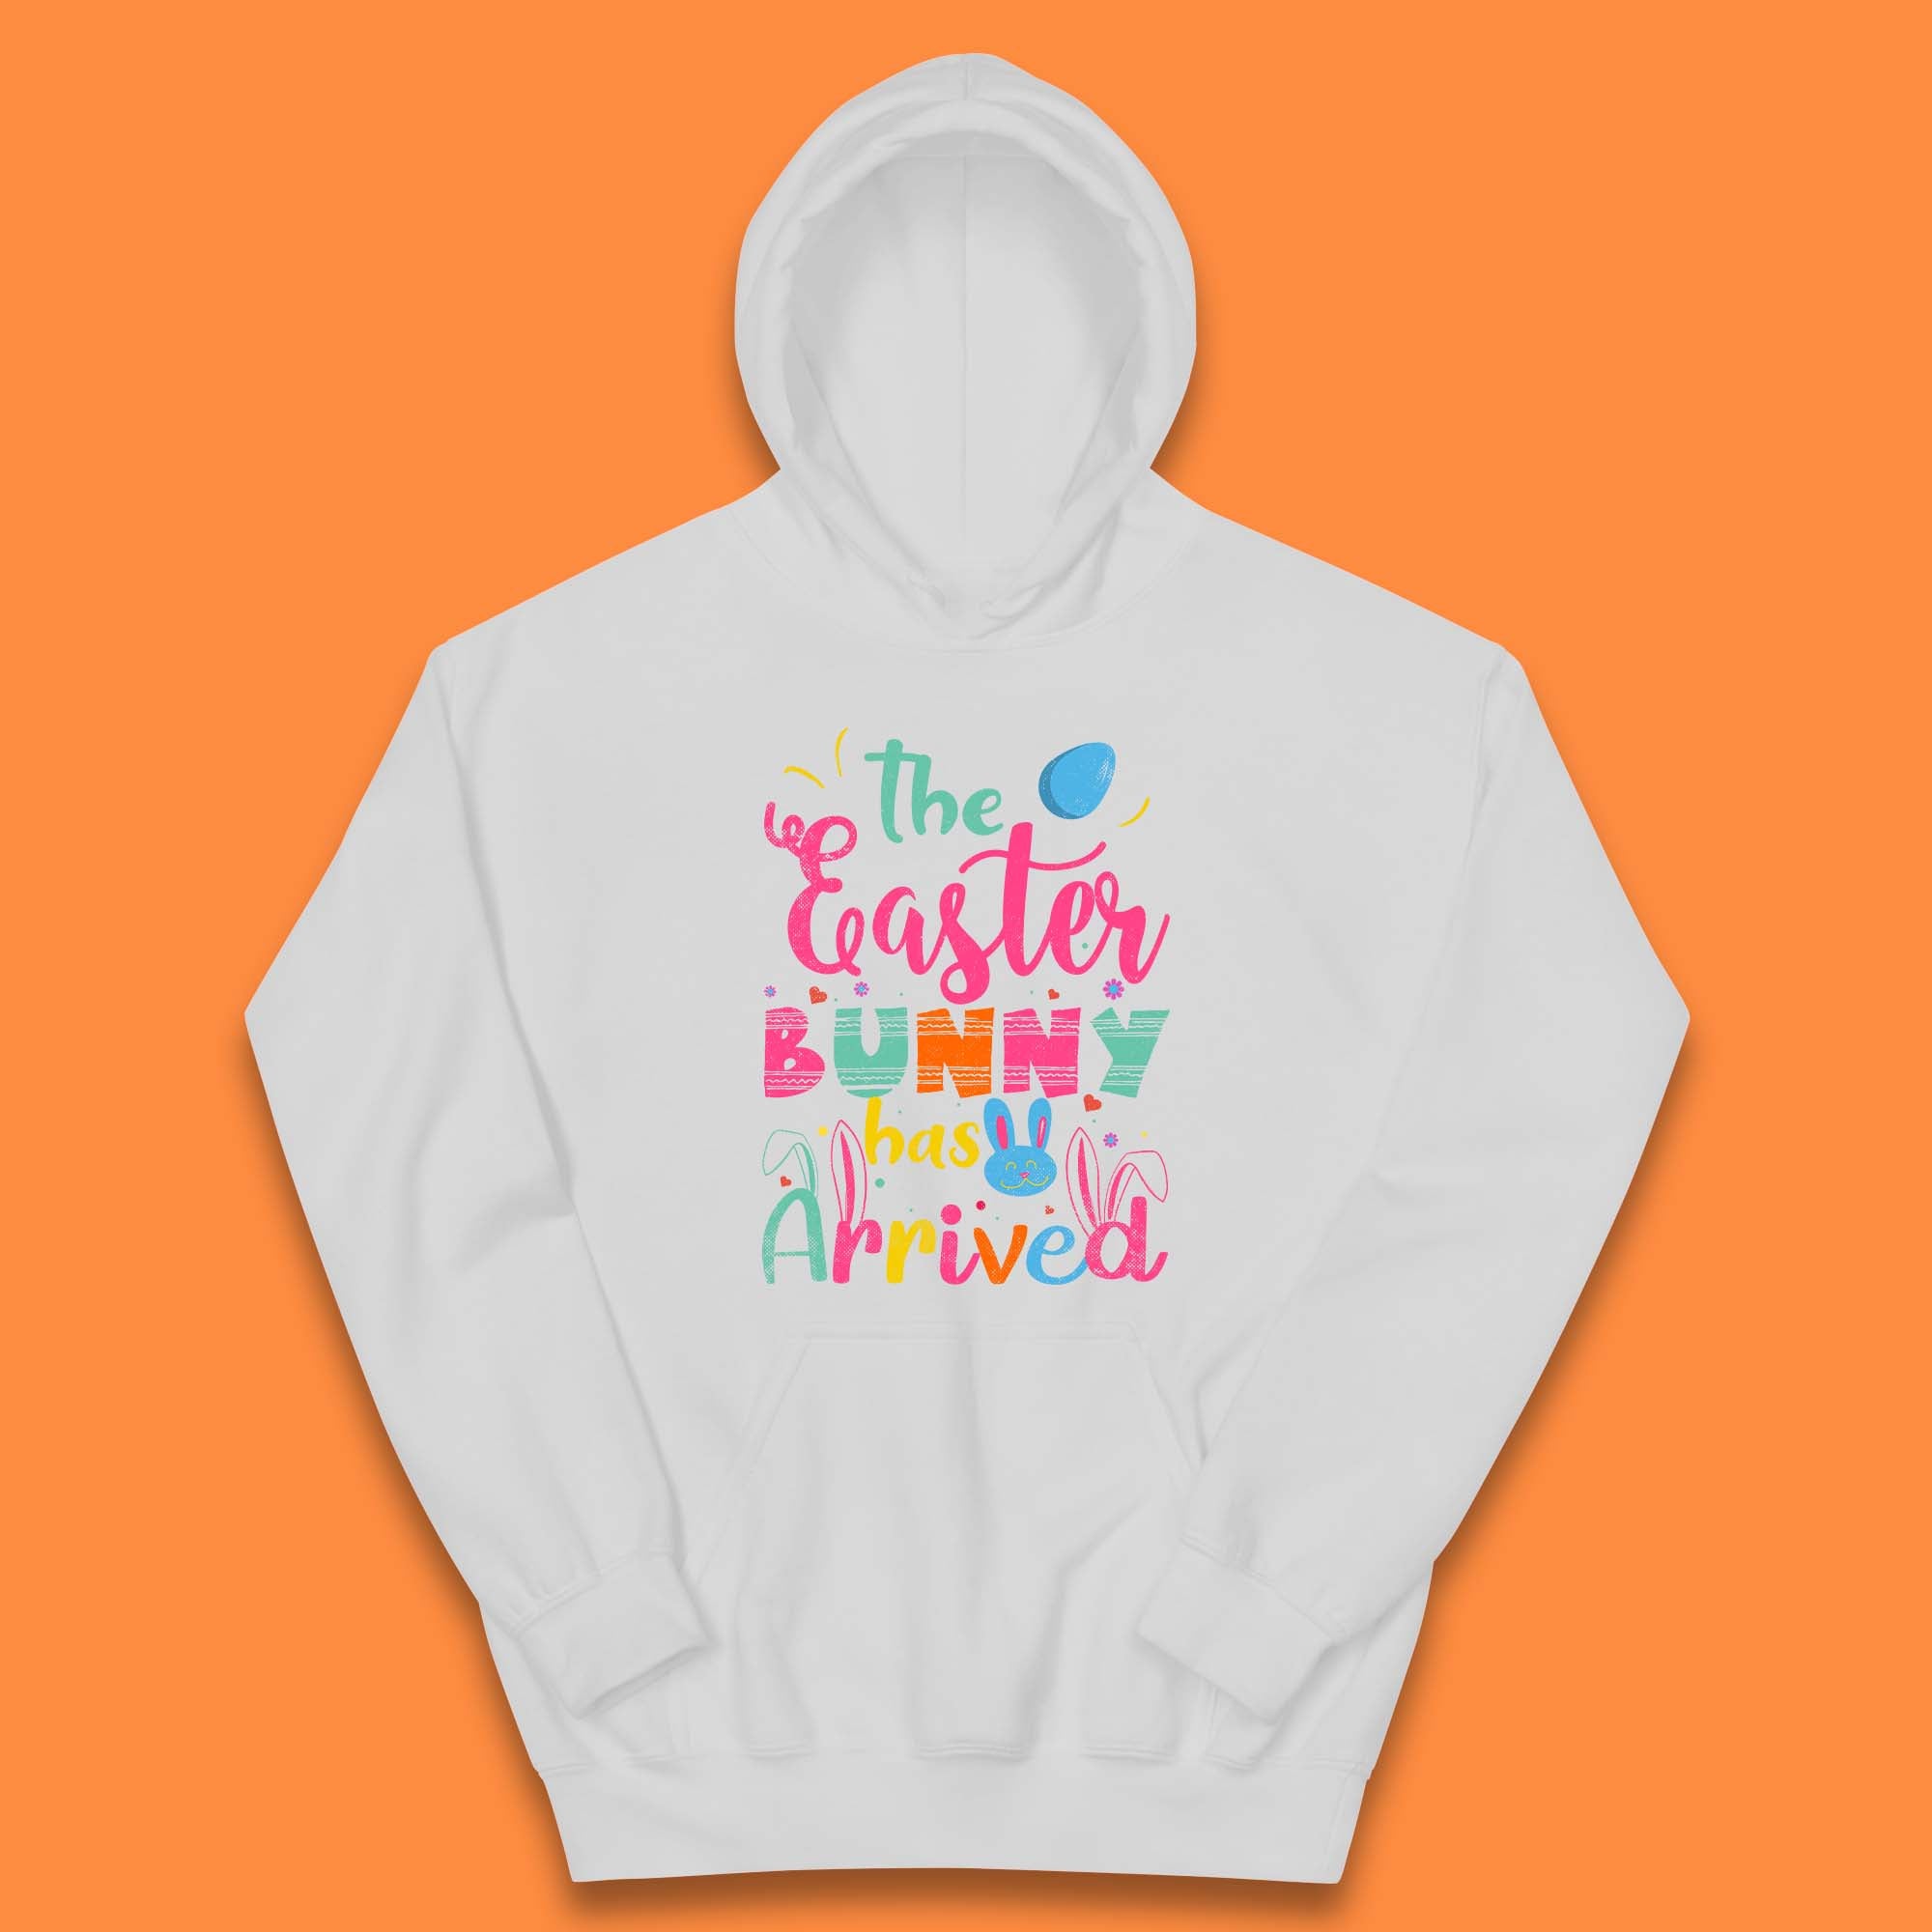 The Easter Bunny Has Arrived Kids Hoodie